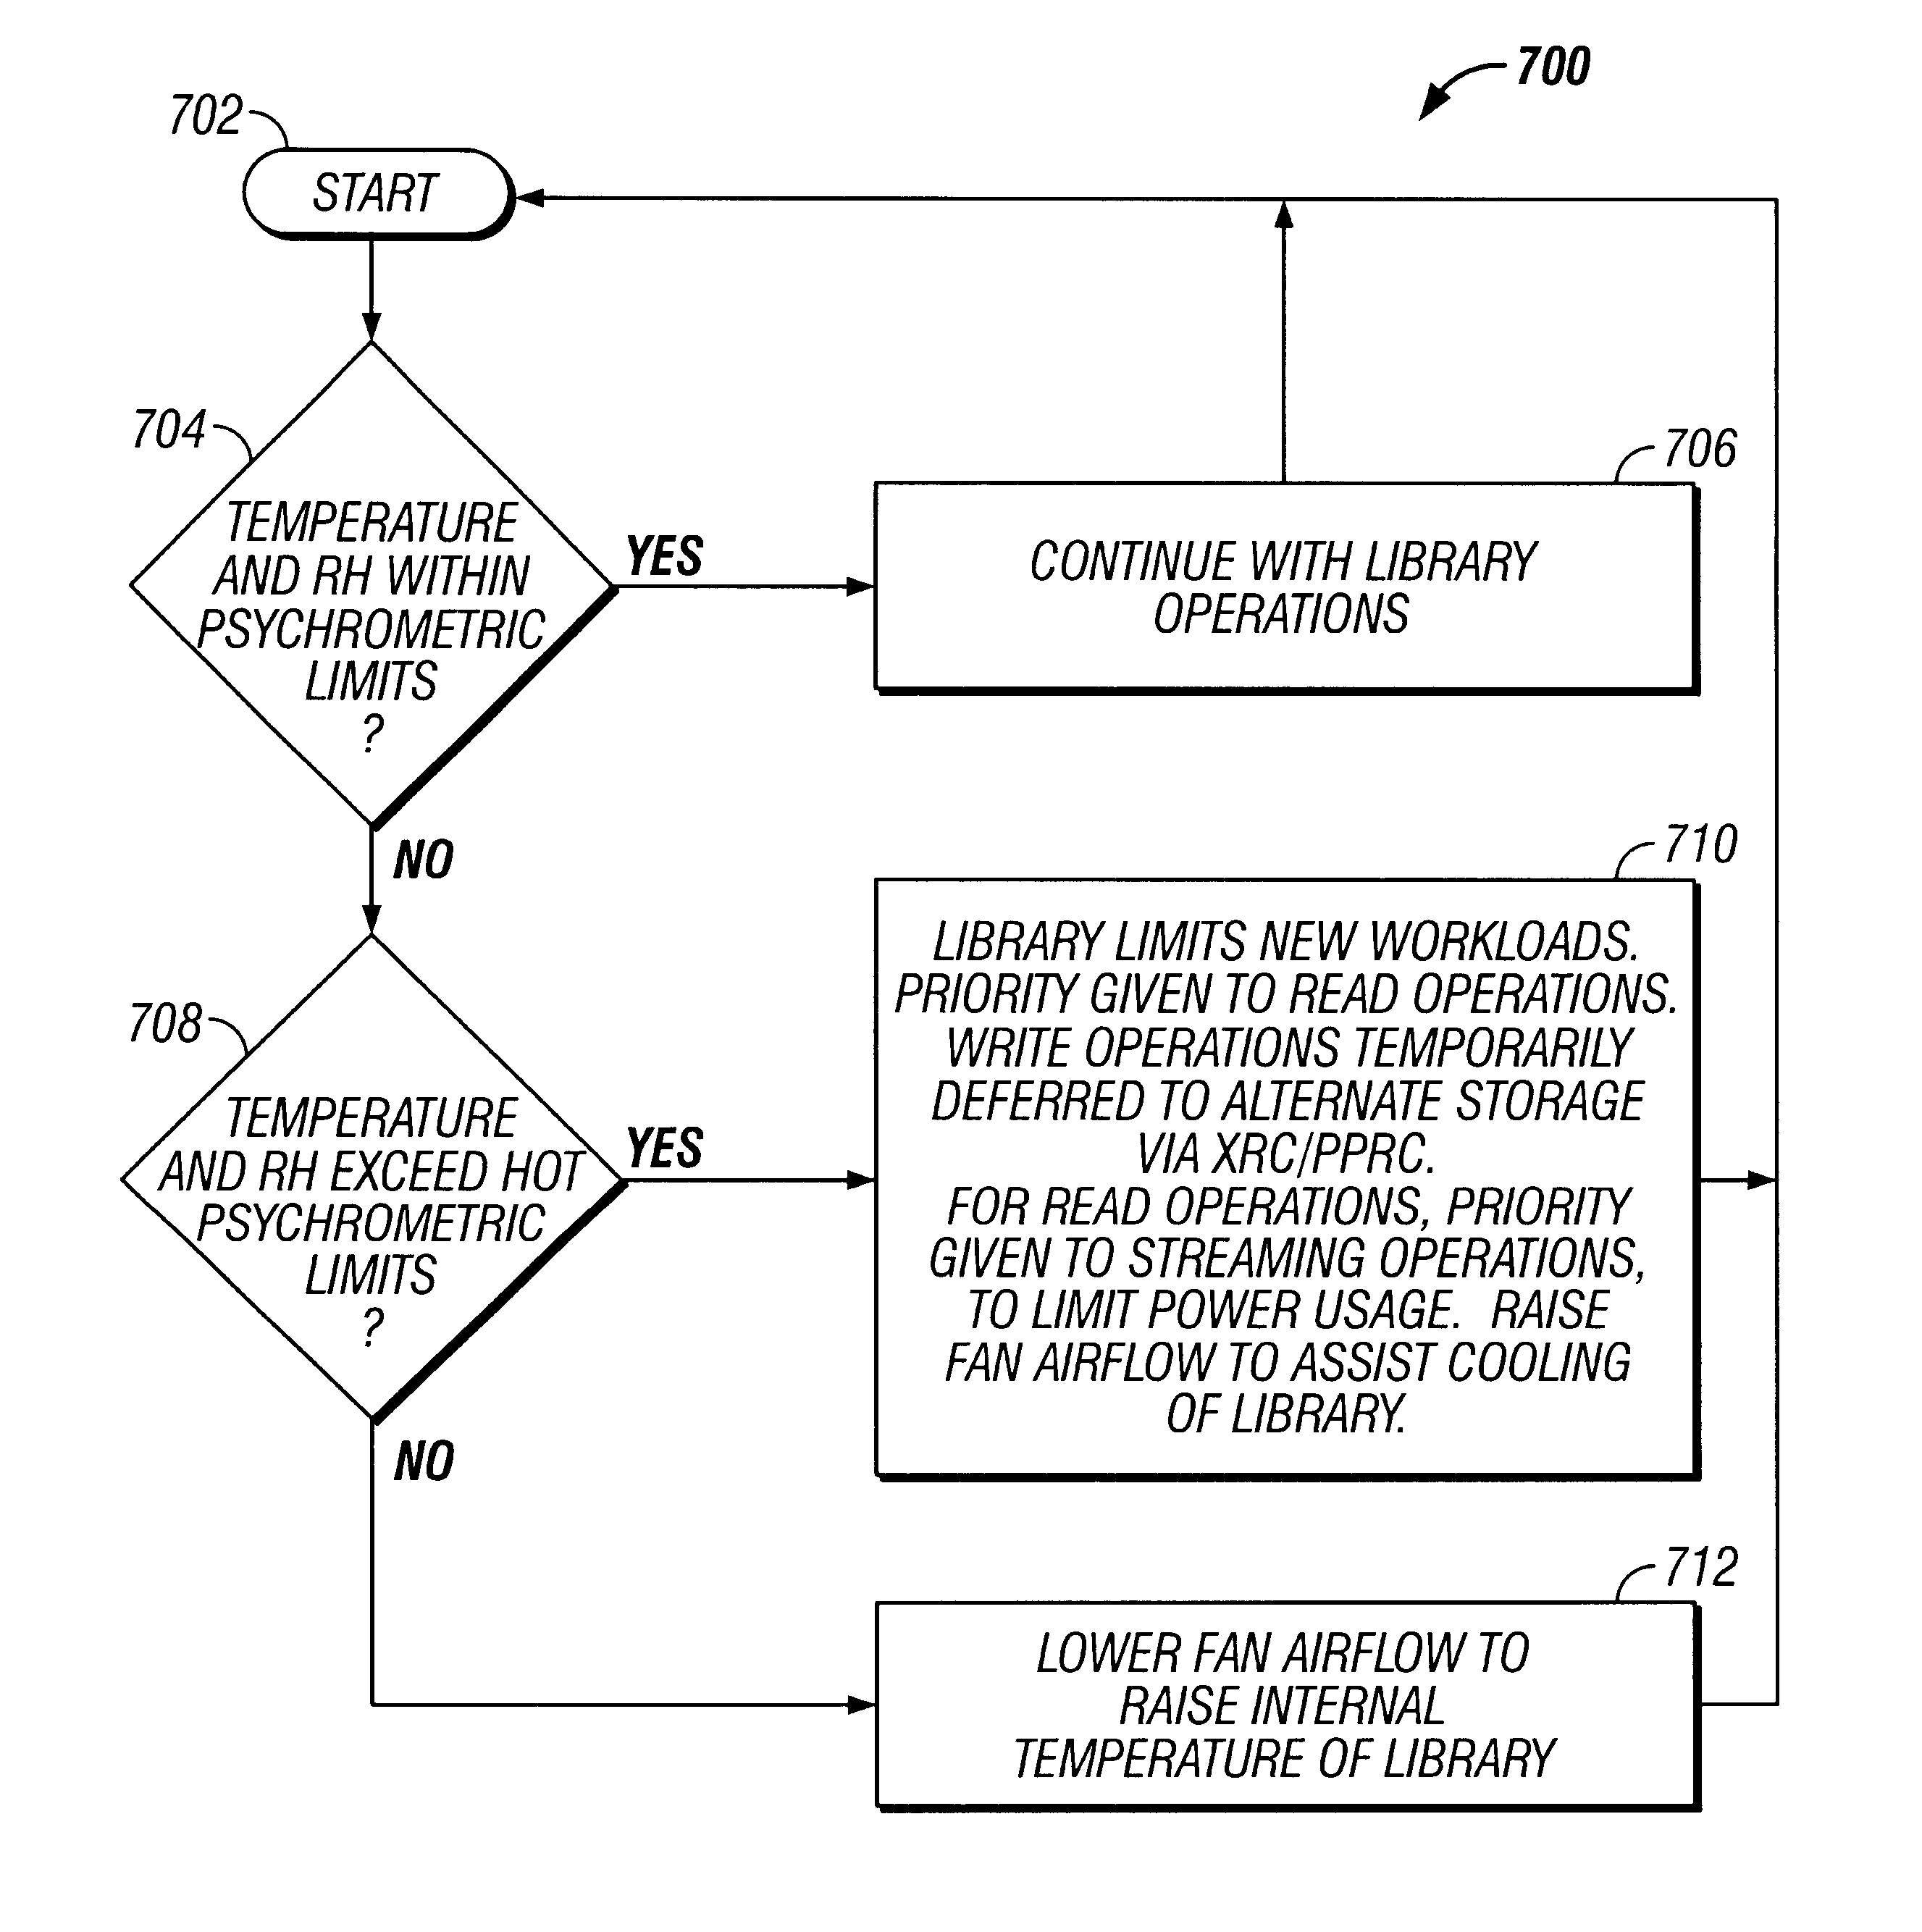 System and method for autonomic environmental monitoring, adjusting, and reporting capability in a remote data storage and retrieval device